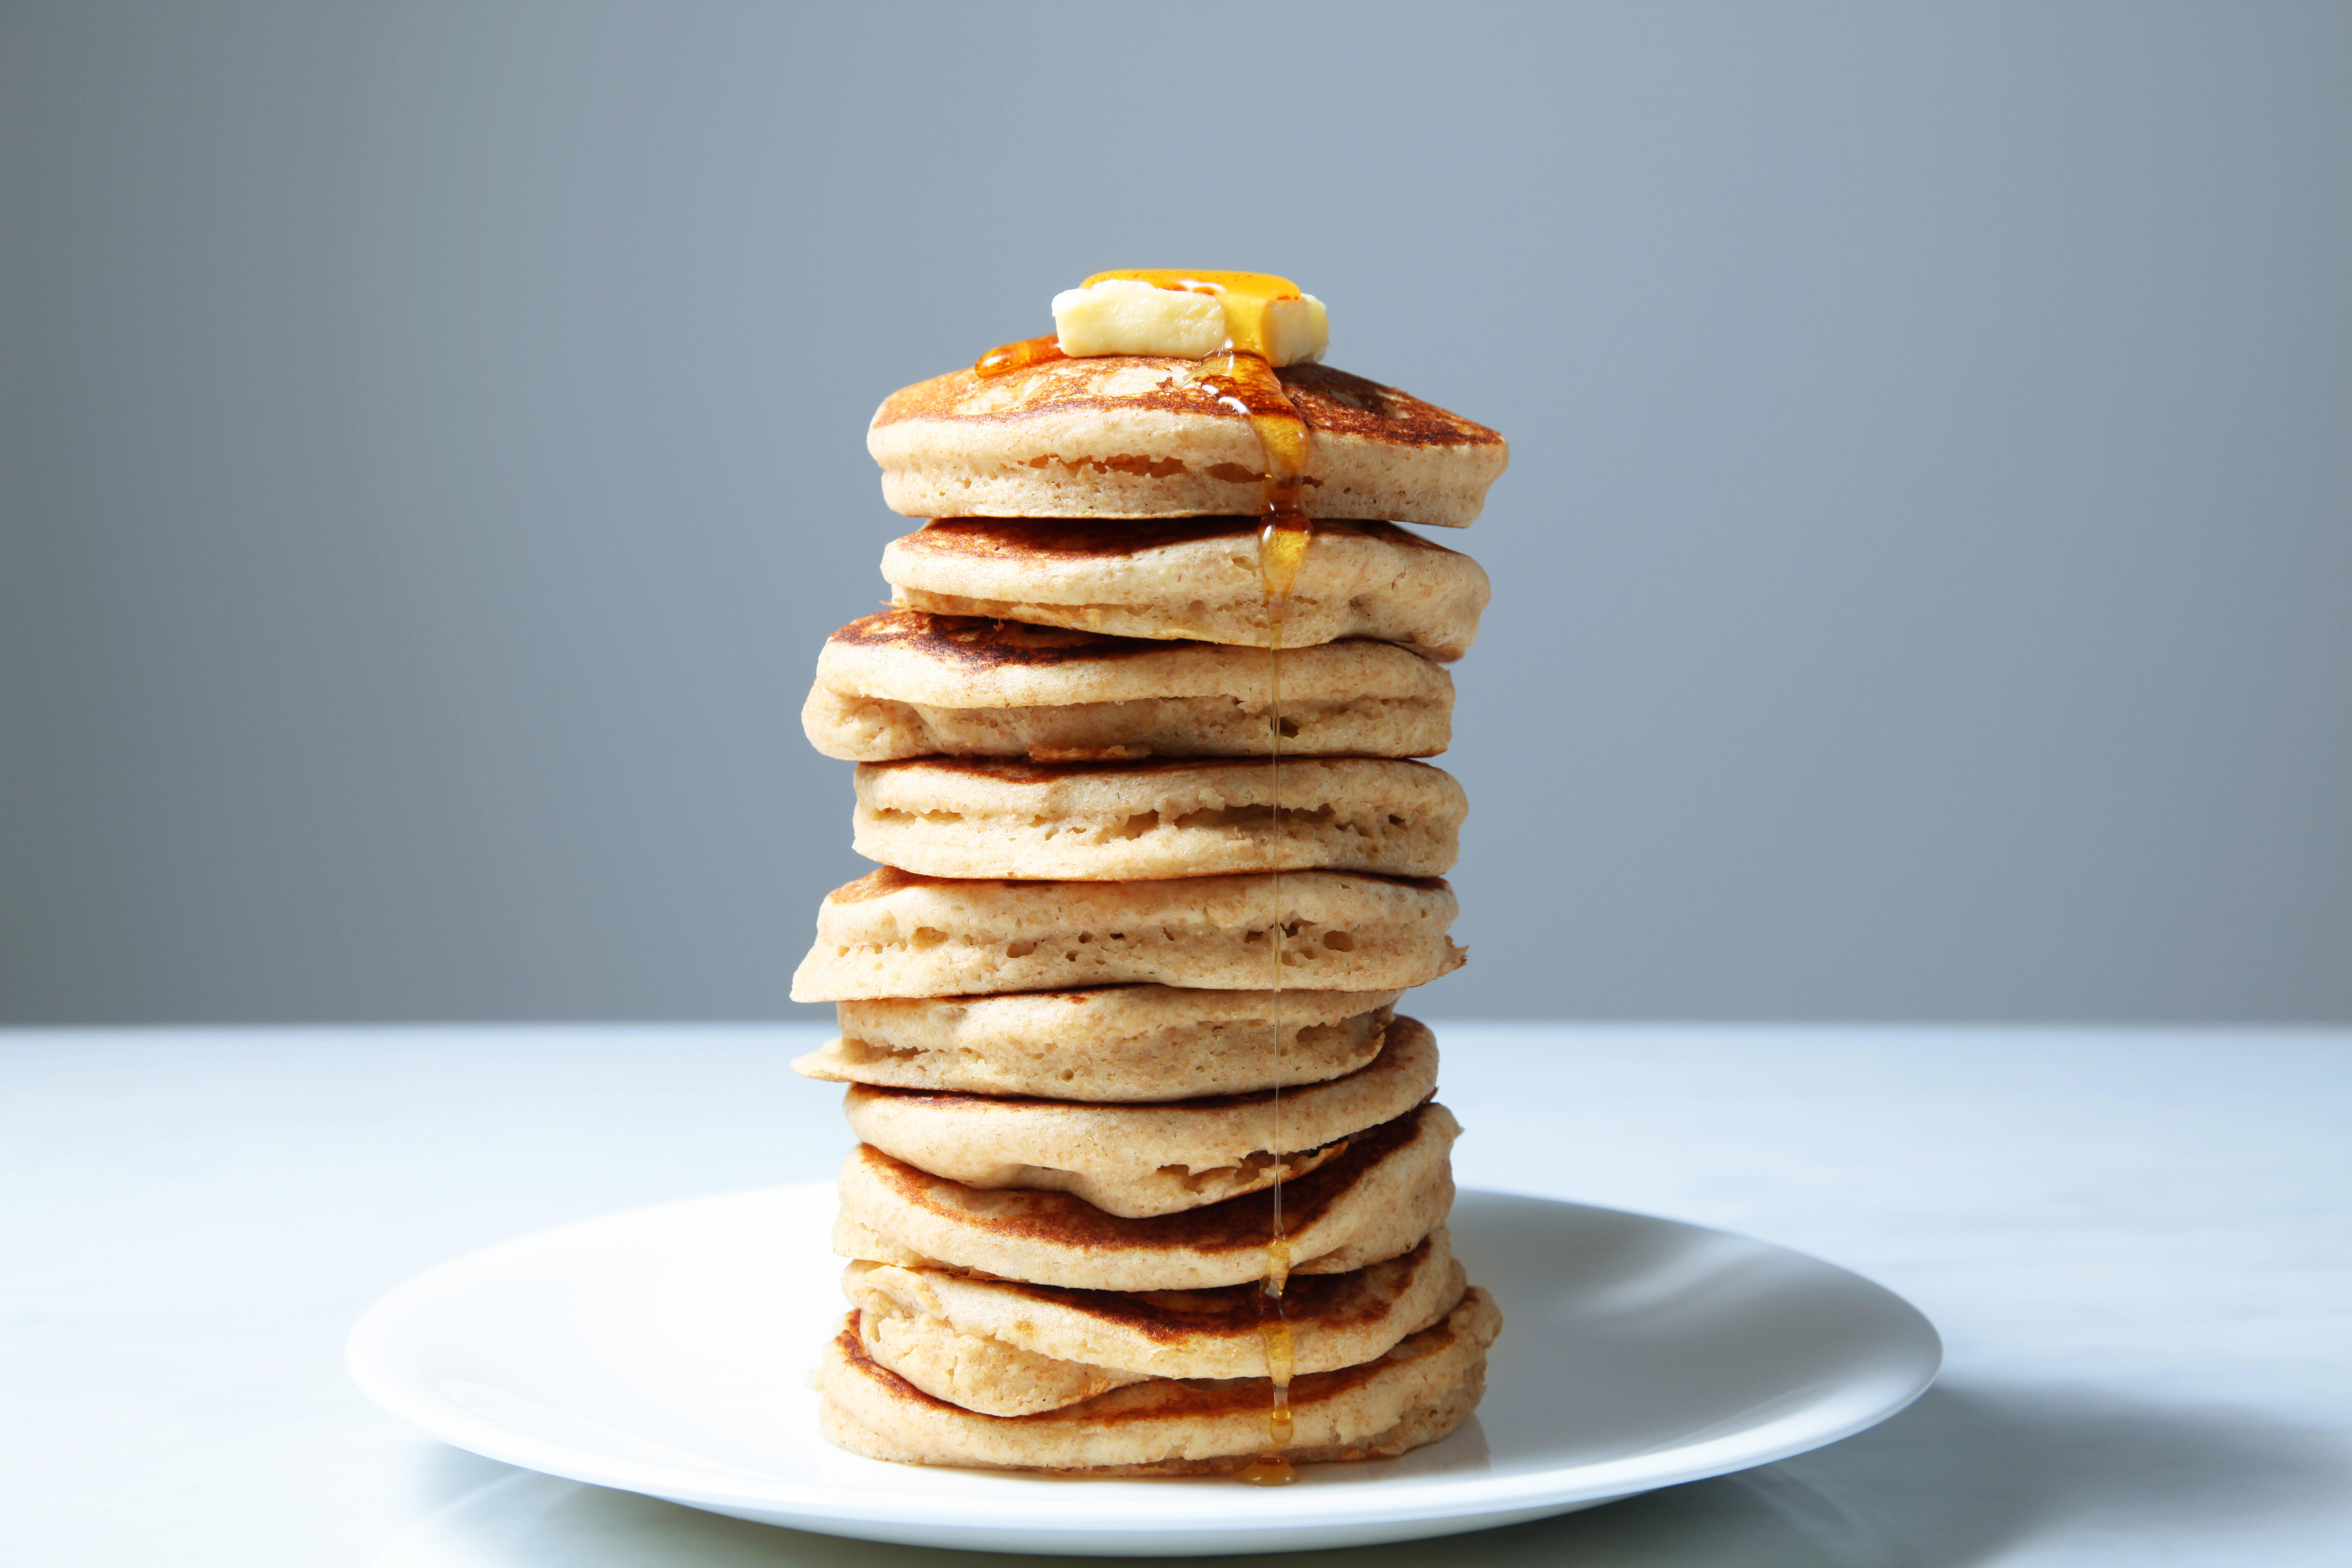 A large stack of fluffy wheat pancakes on a white plate.  golden yellow butter and maple syrup.   